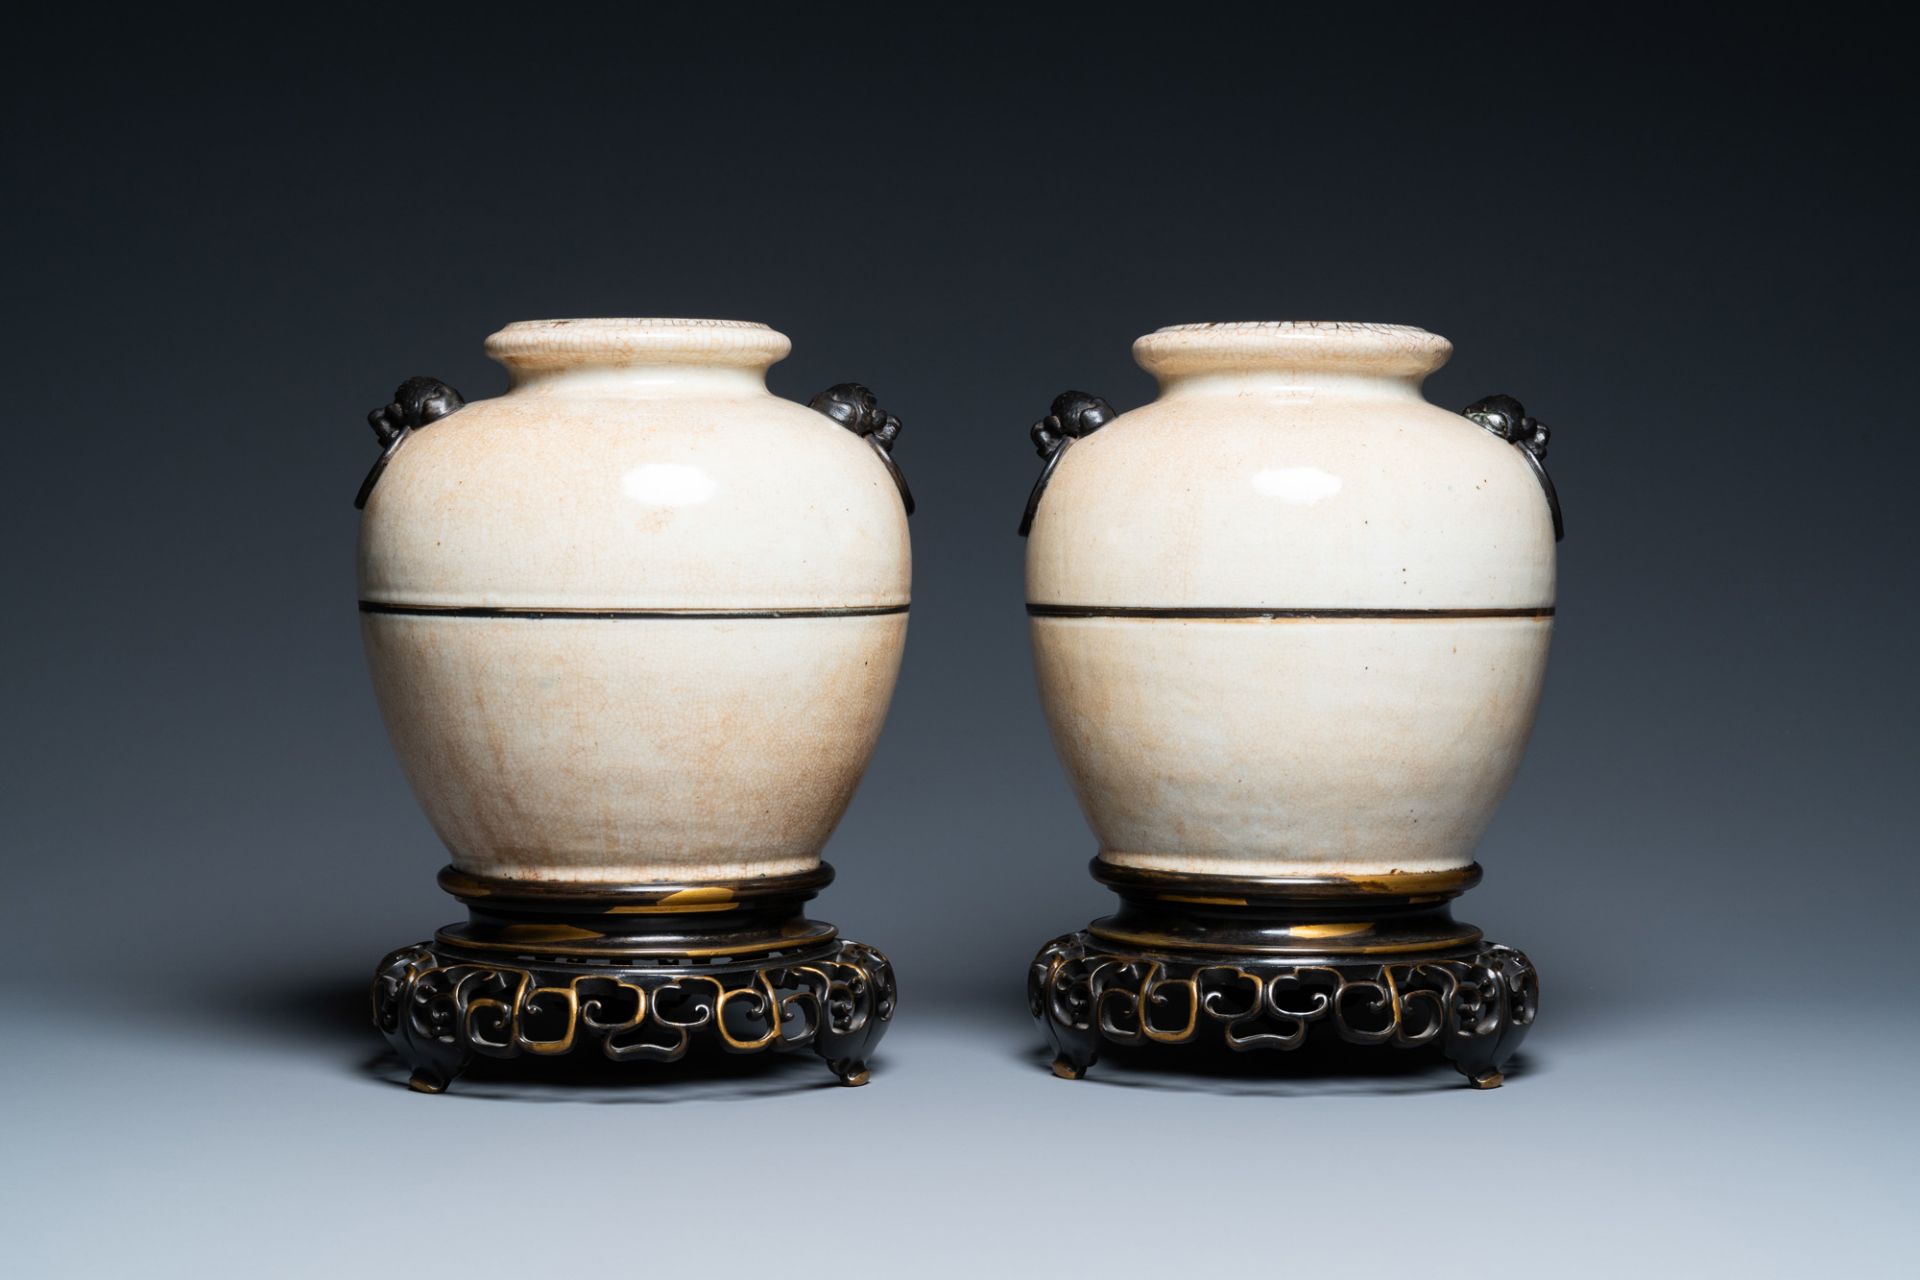 A pair of Chinese monochrome Nanking crackle-glazed vases on reticulated bronze stands, 19th C. - Image 3 of 6